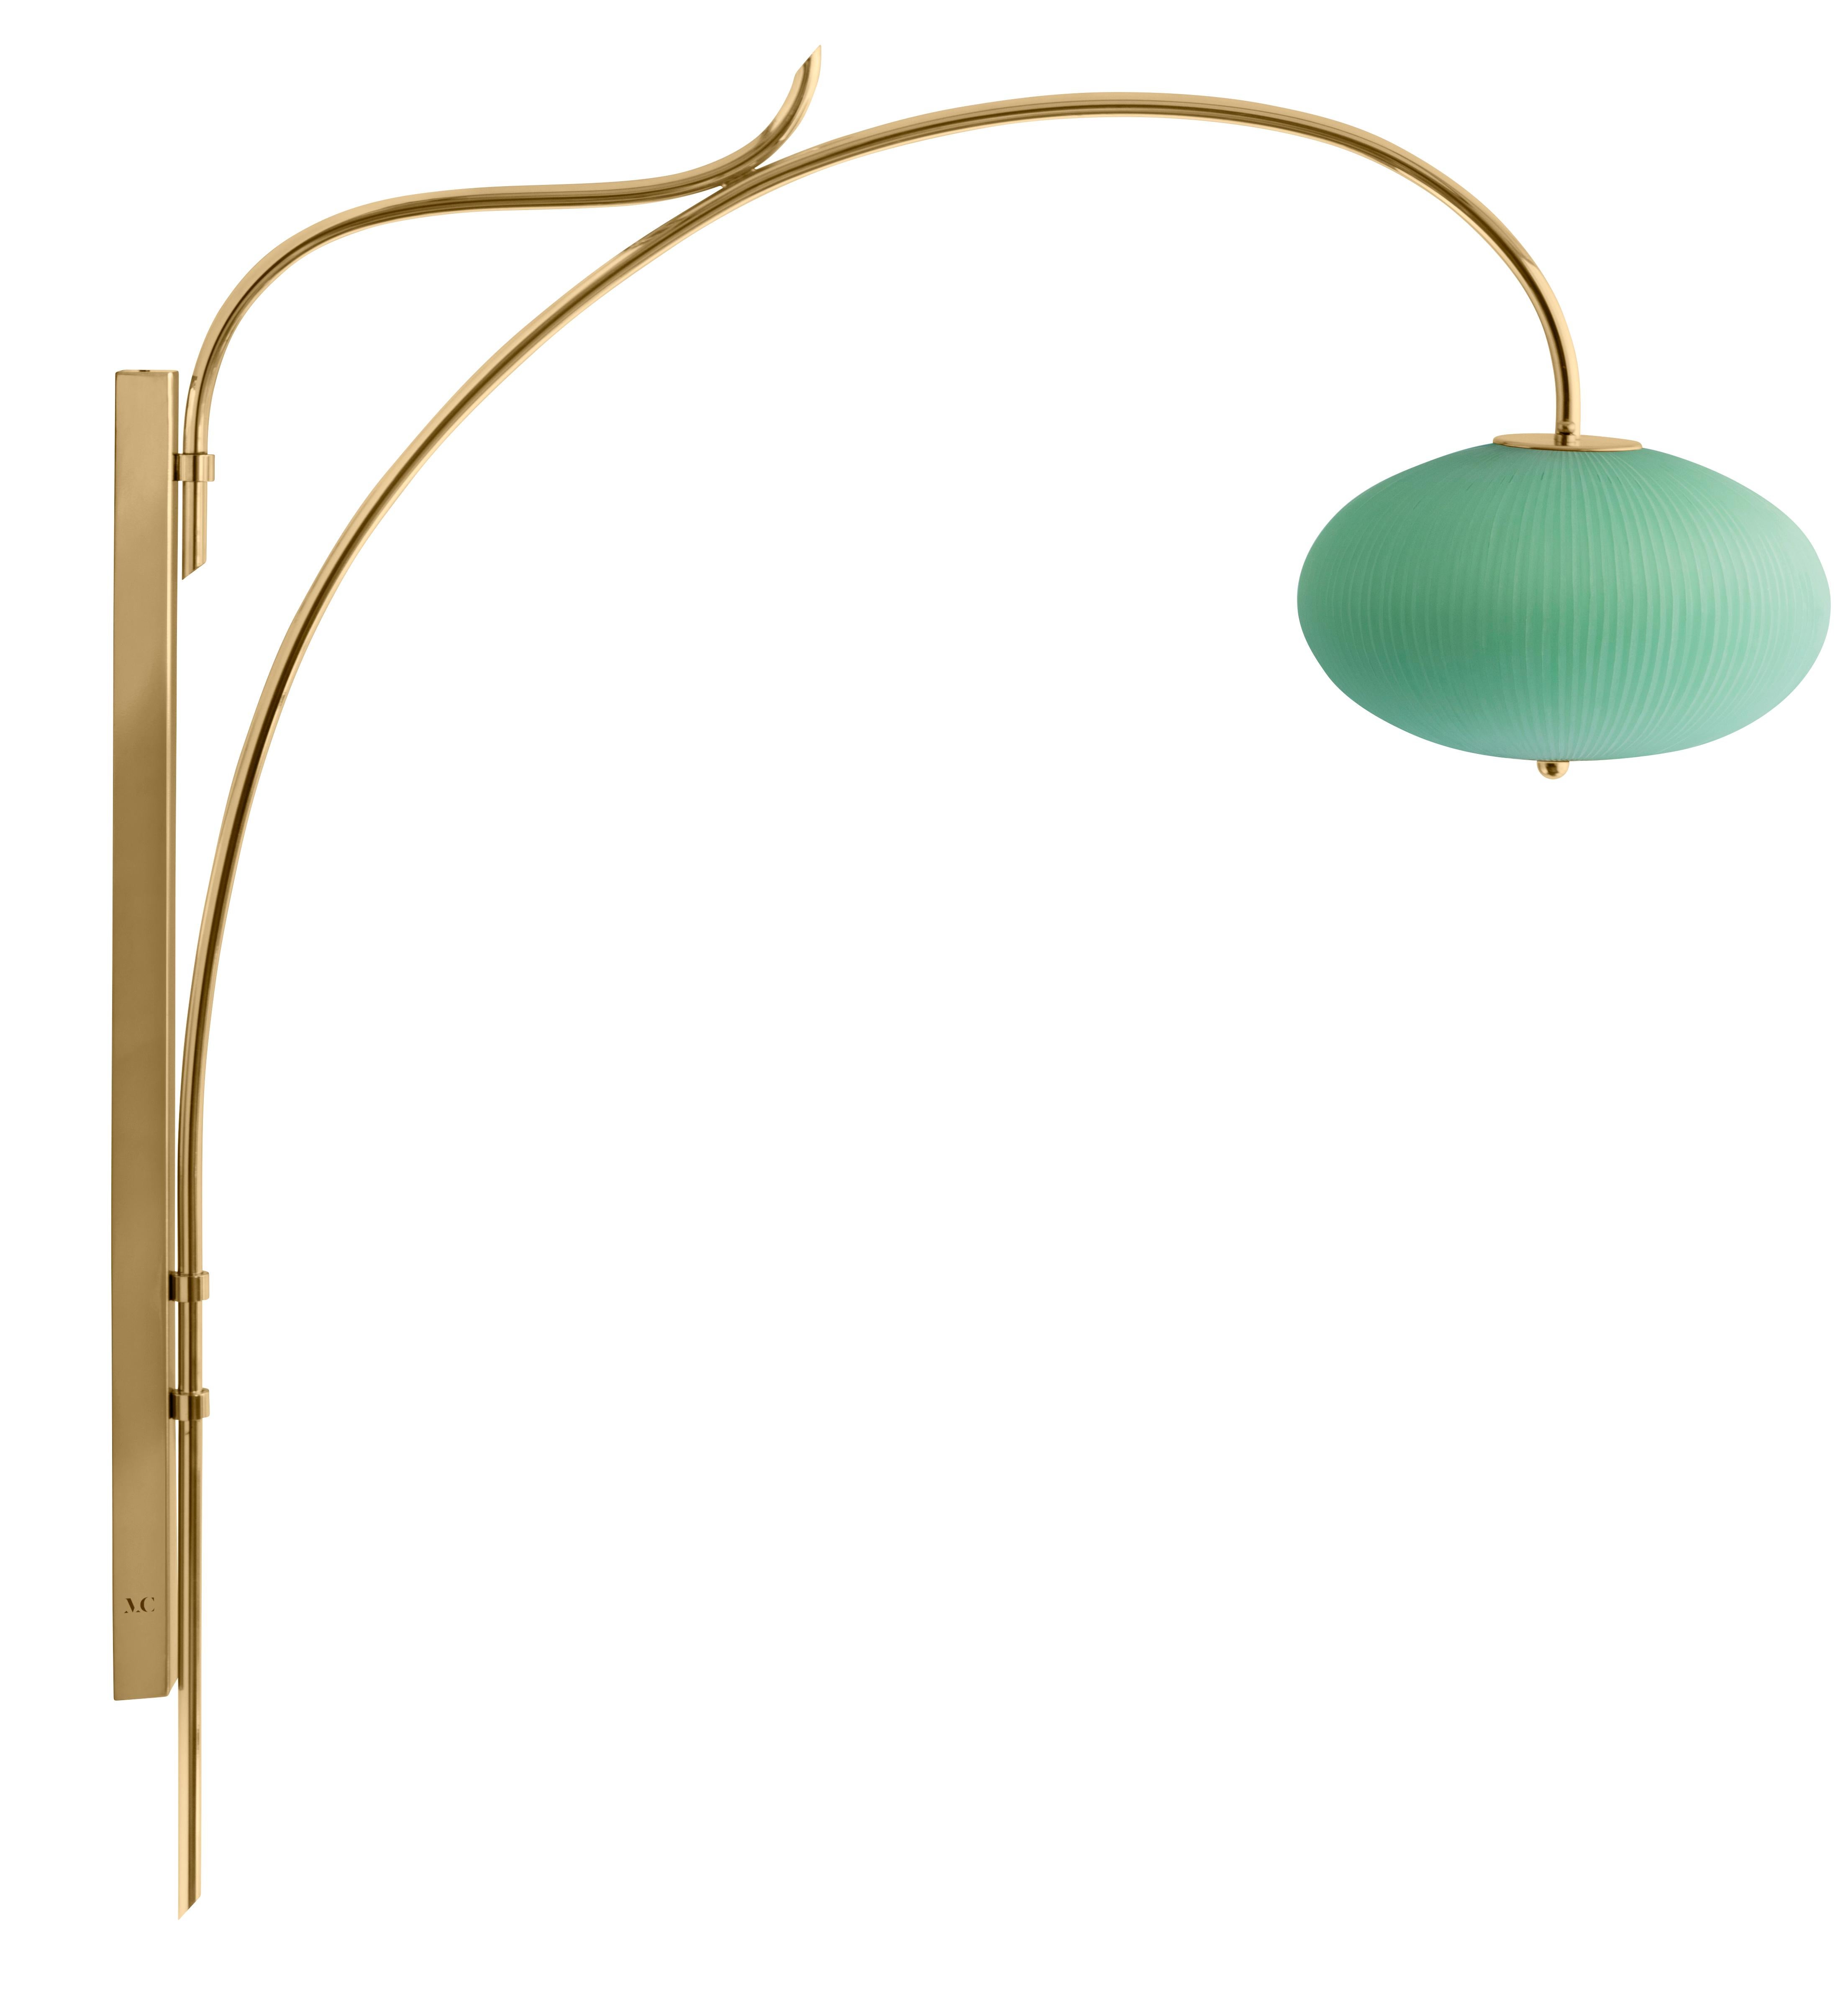 Wall lamp China 07 by Magic Circus Editions.
Dimensions: H 120 x W 32 x D 113.5 cm.
Materials: brass, mouth blown glass sculpted with a diamond saw.
Colour: jade green.

Available finishes: brass, nickel.
Available colours: enamel soft white,